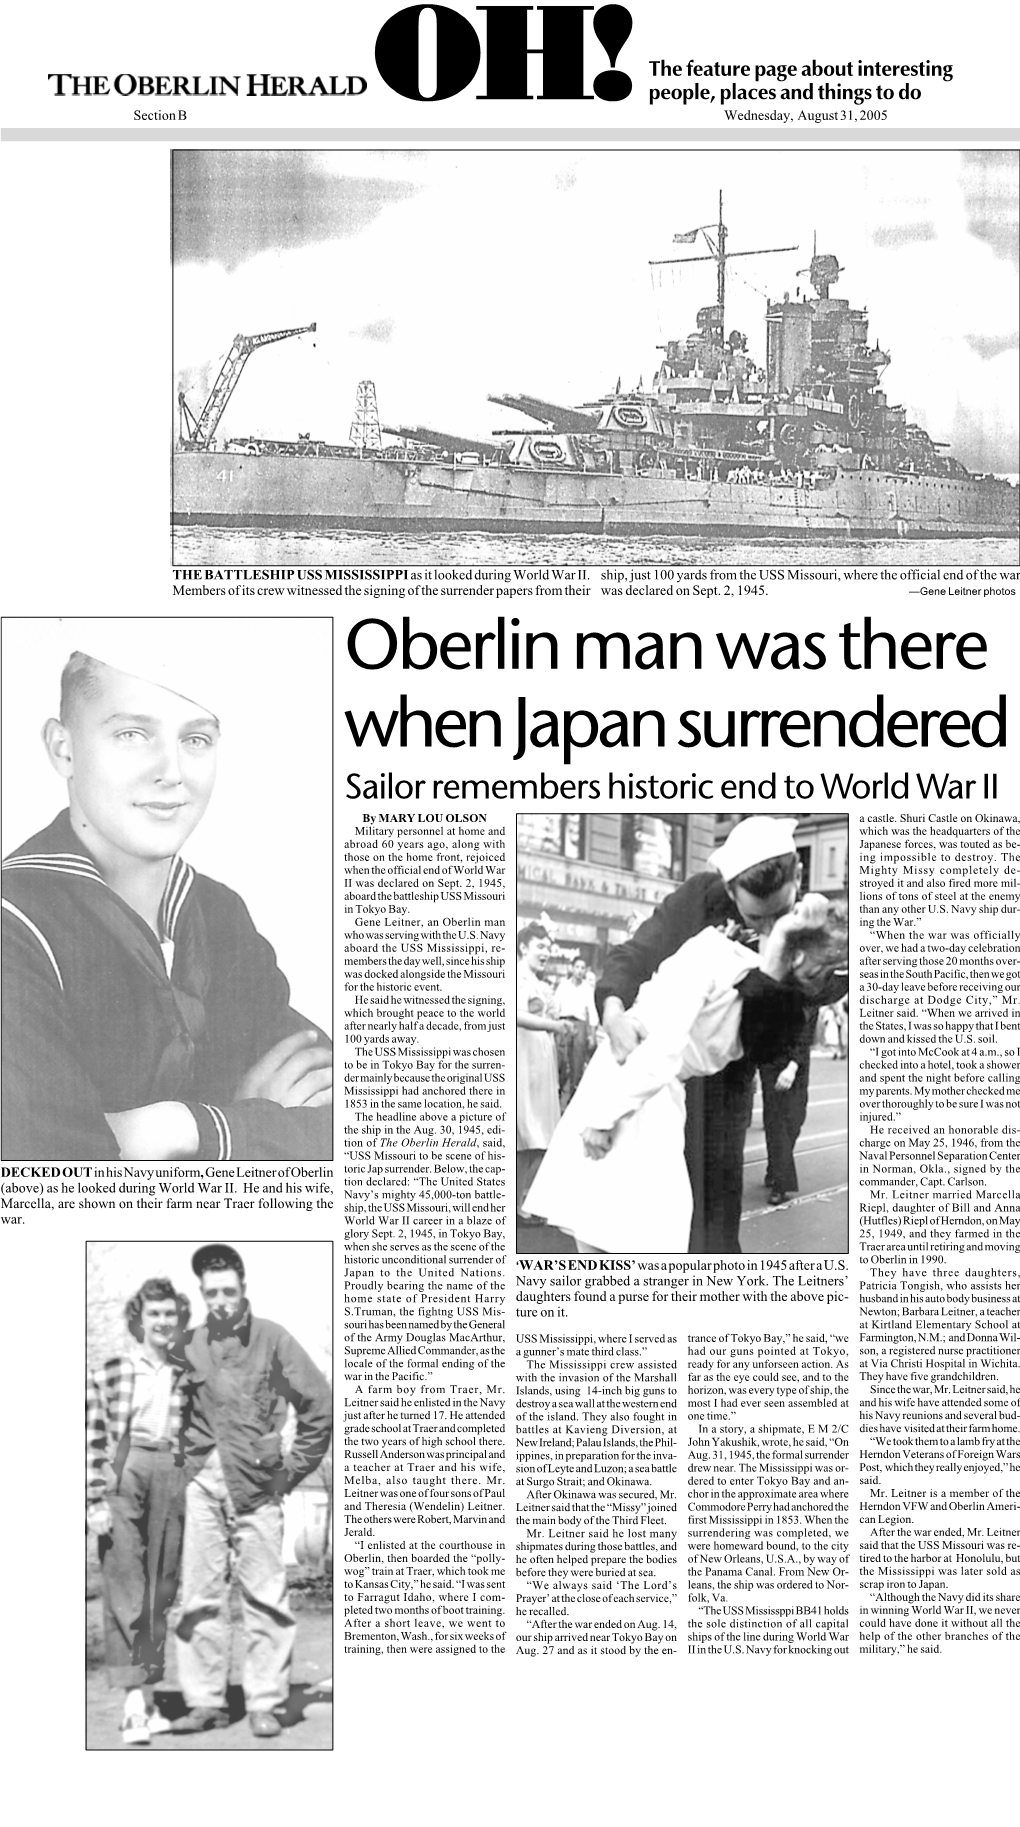 Oberlin Man Was There When Japan Surrendered Sailor Remembers Historic End to World War II by MARY LOU OLSON a Castle